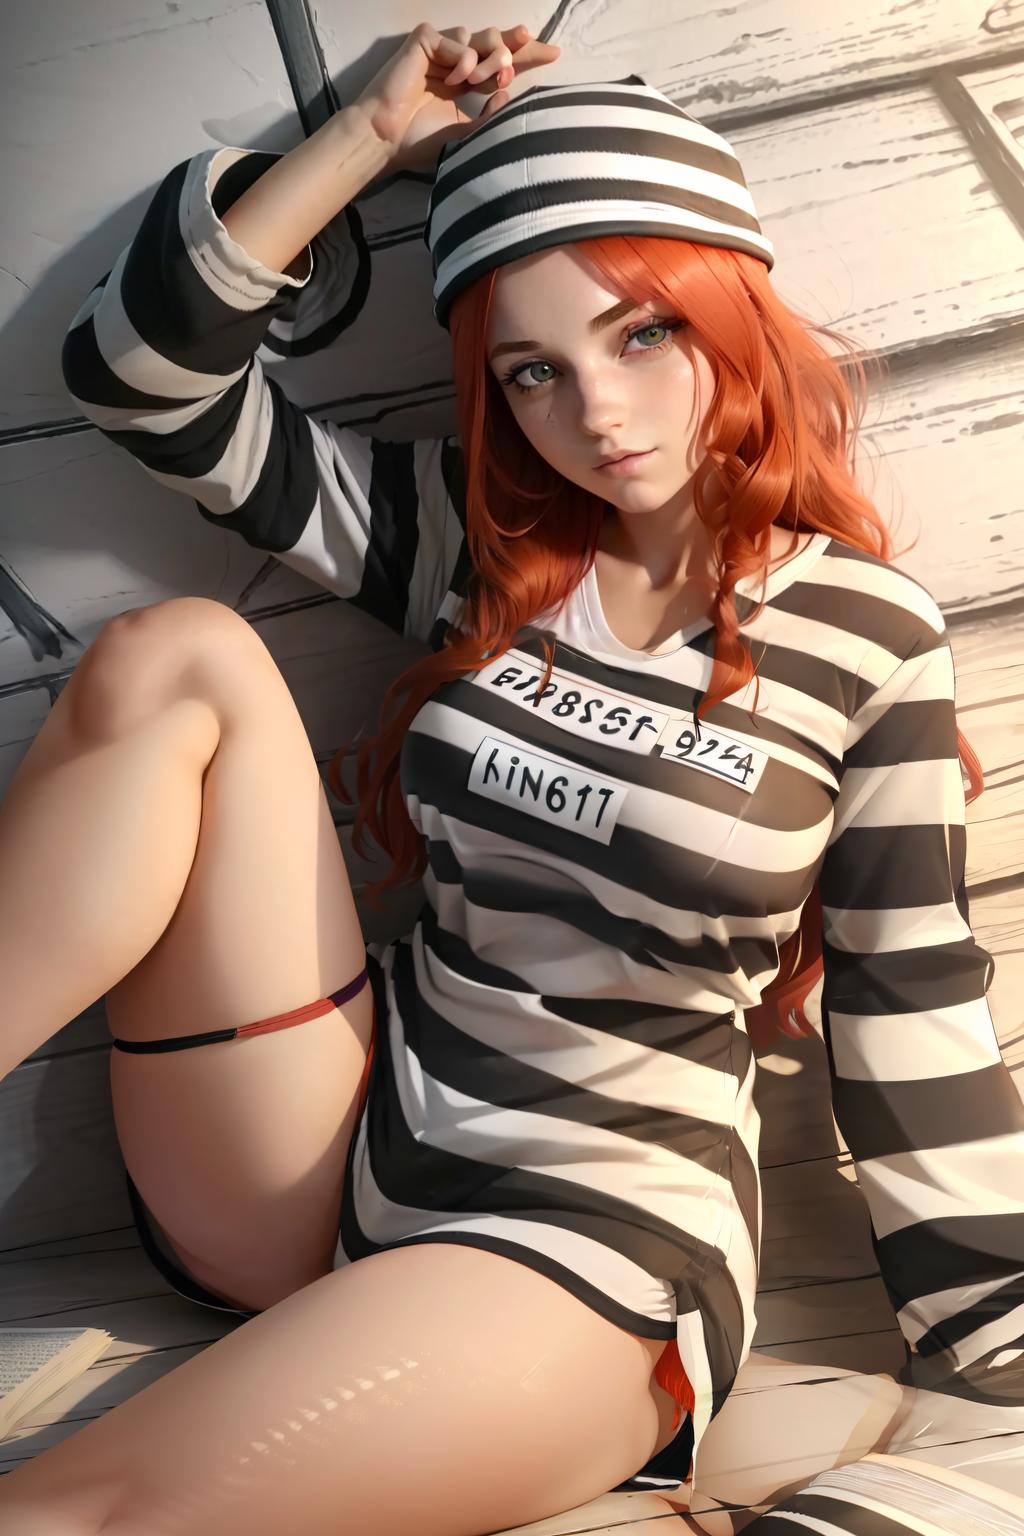 Prisoner Outfit - Clothing image by wartificialai765